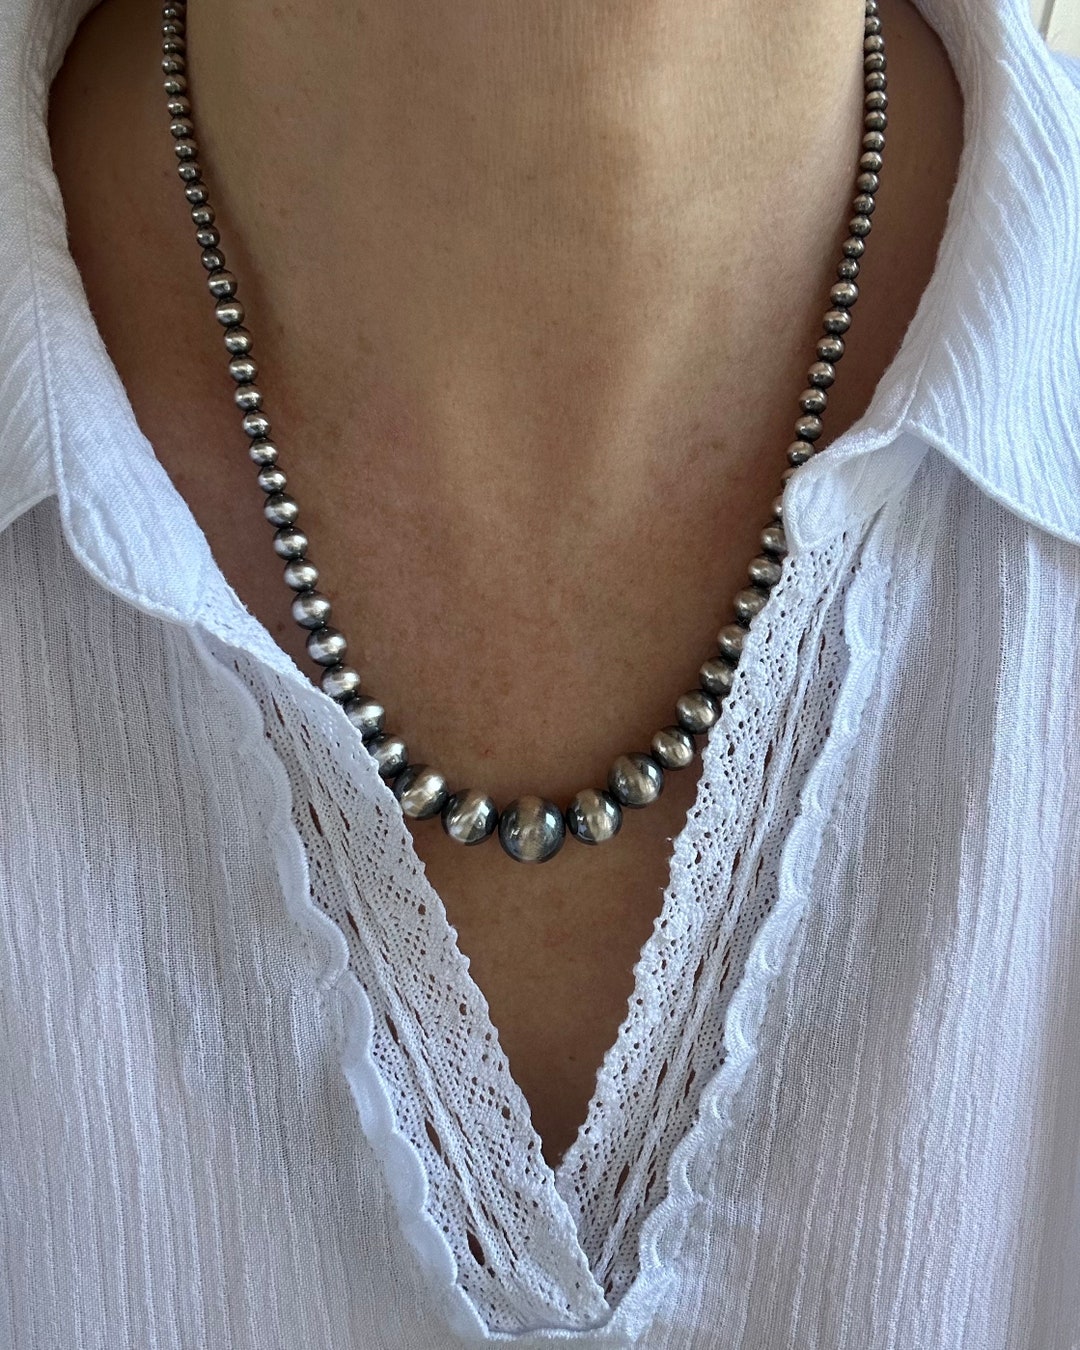 Graduated Sterling Silver Navajo Pearls Necklace, Large 12mm to 4mm ...